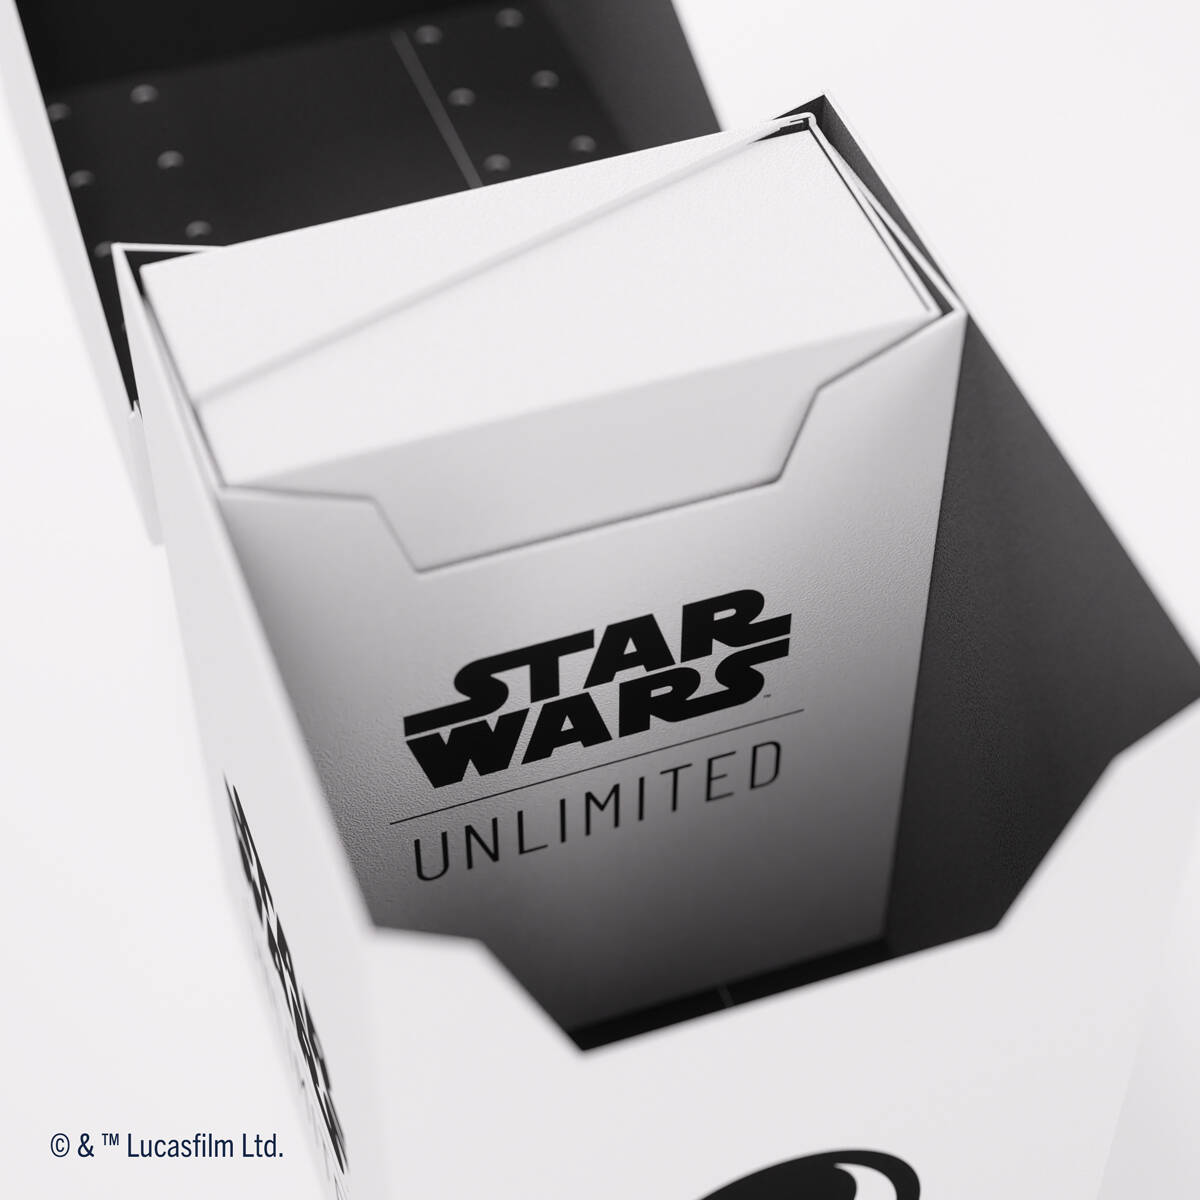 Star Wars: Unlimited Soft Crate Weiss